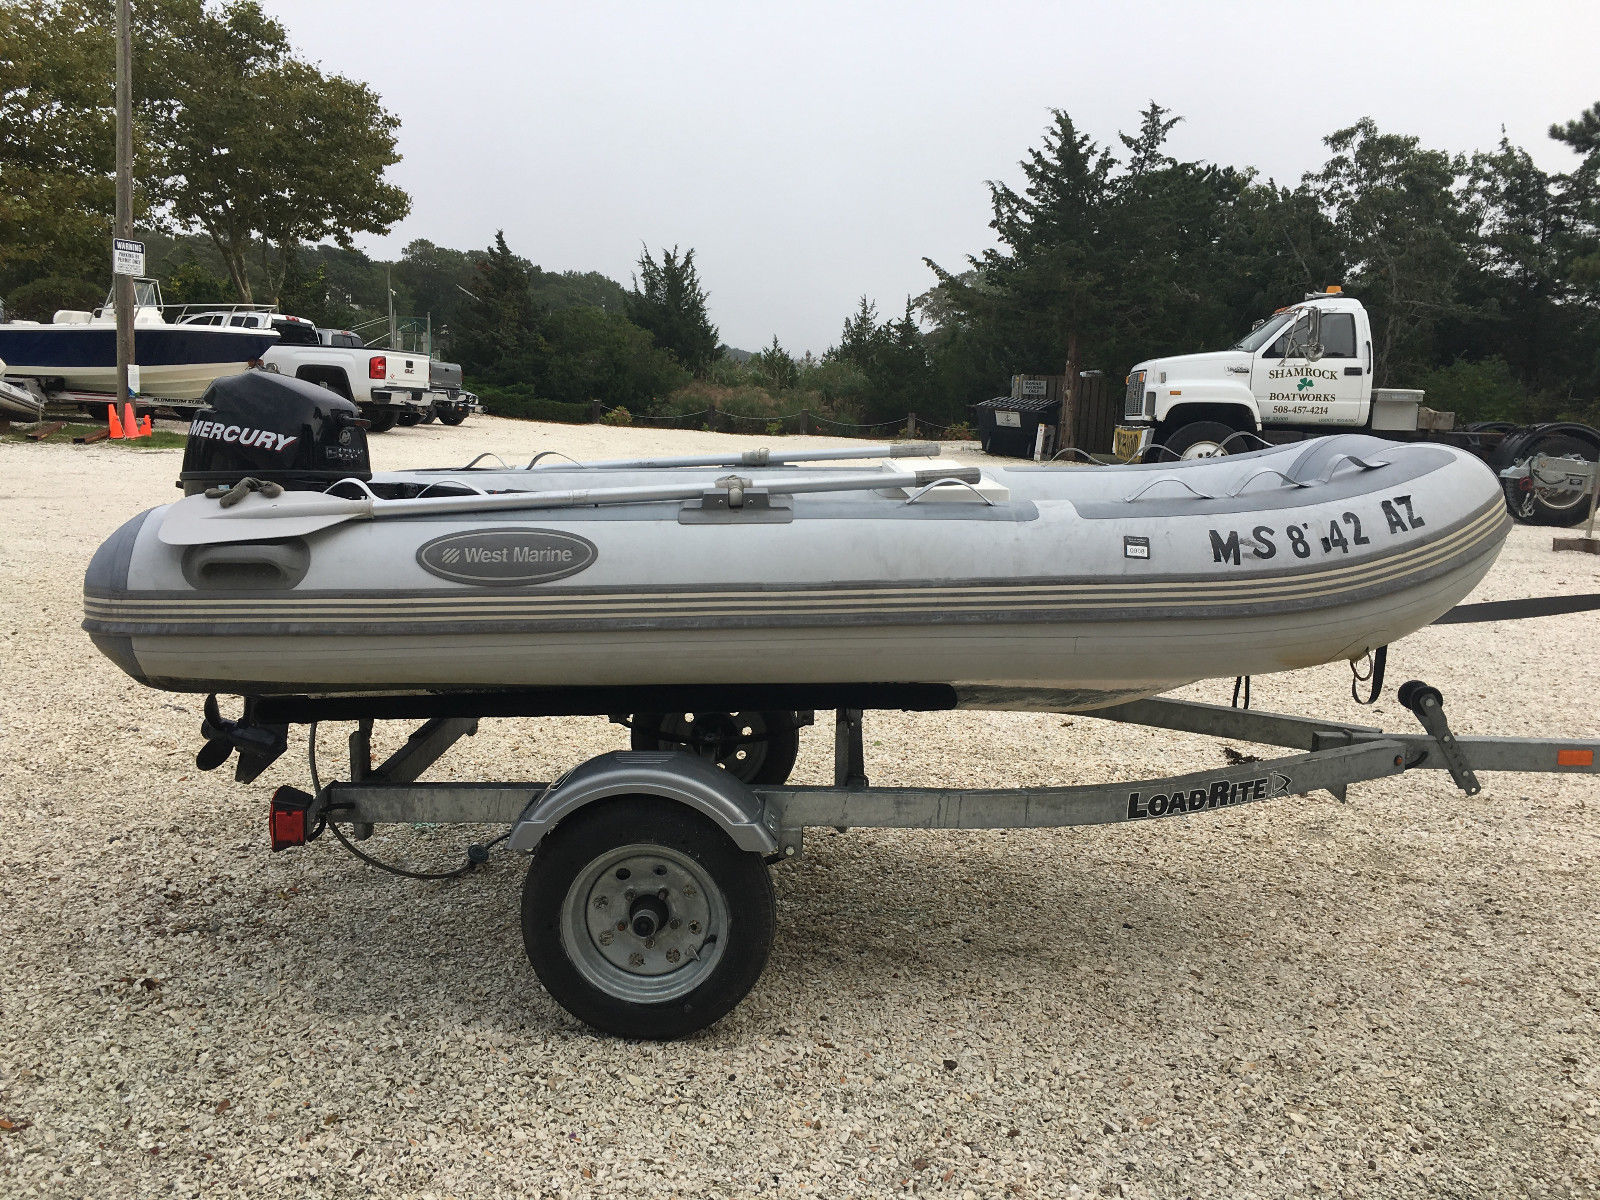 Maak leven klink R West Marine RIB 310 HYP 2012 for sale for $2,499 - Boats-from-USA.com